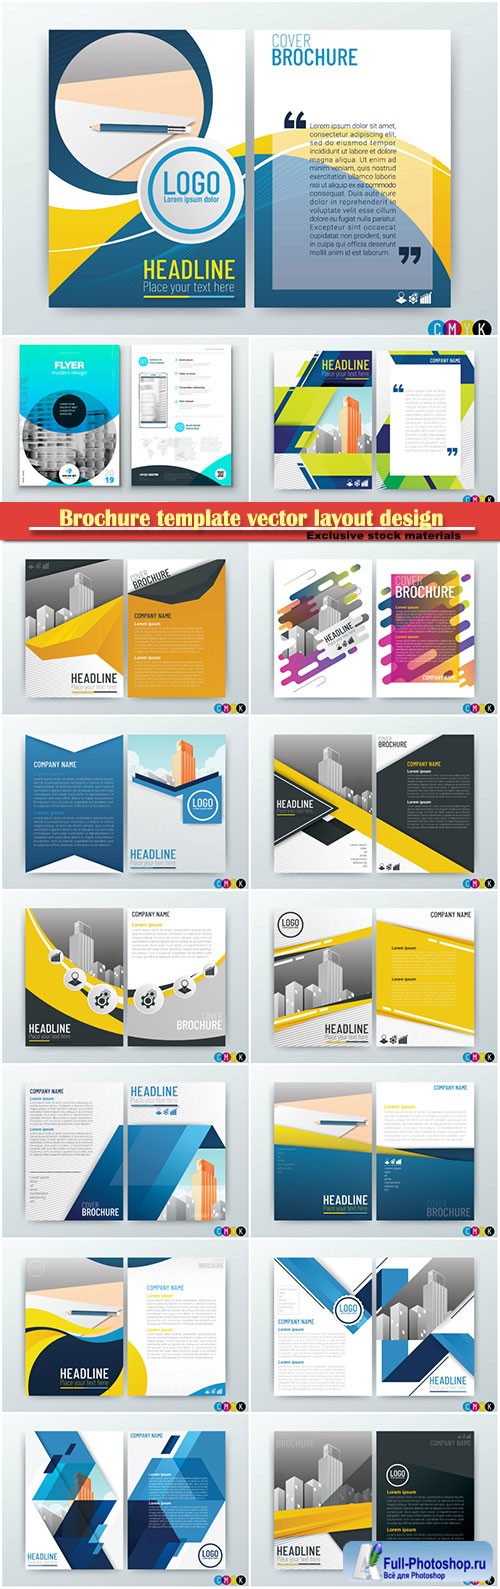 Brochure template vector layout design, corporate business annual report, magazine, flyer mockup # 154